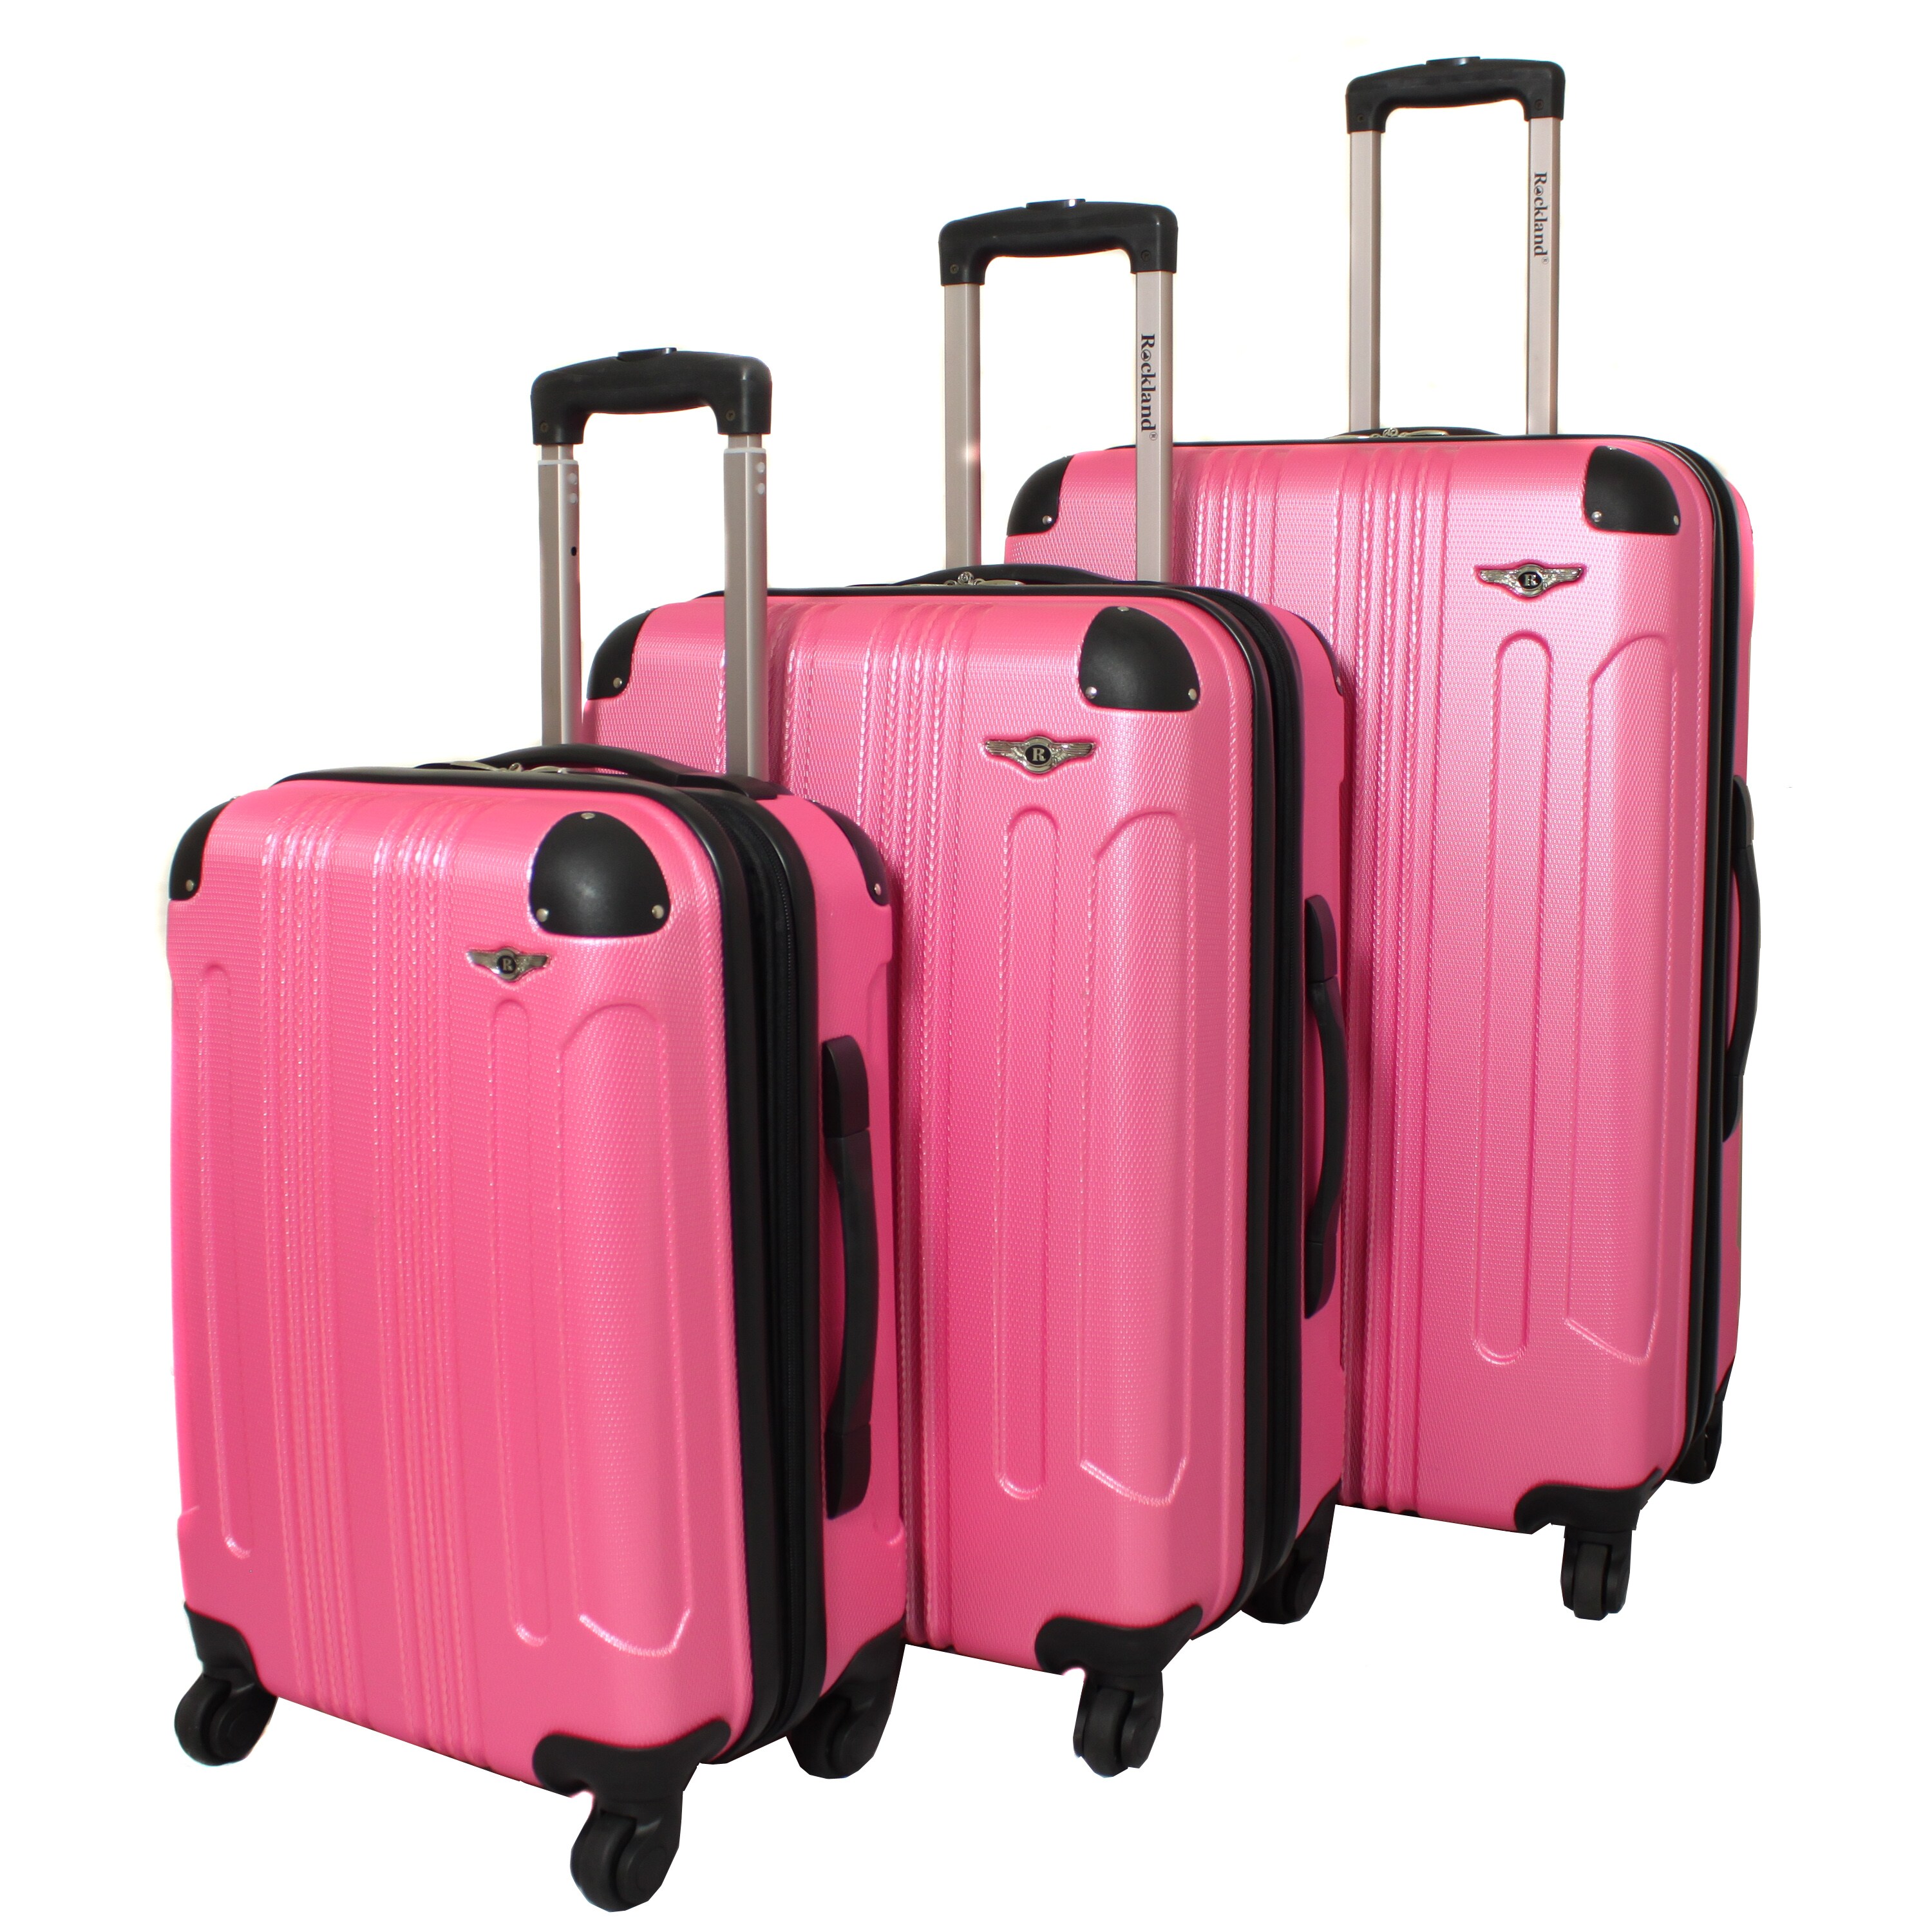 Spinner Upright Luggage Set Today $184.99 3.8 (4 reviews)